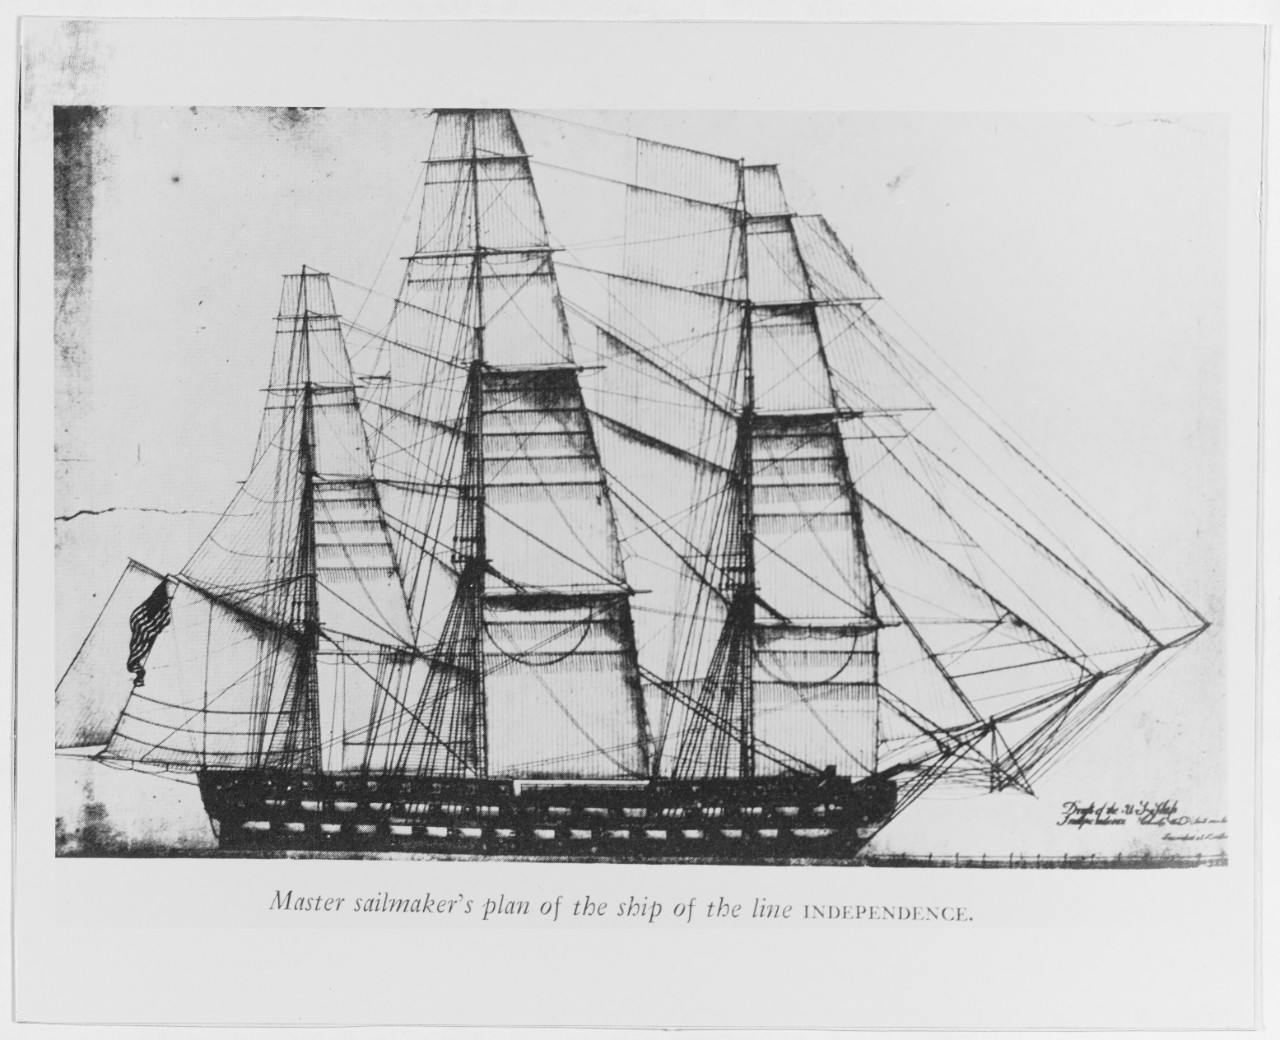 Ship INDEPENDENCE (1814-1913)